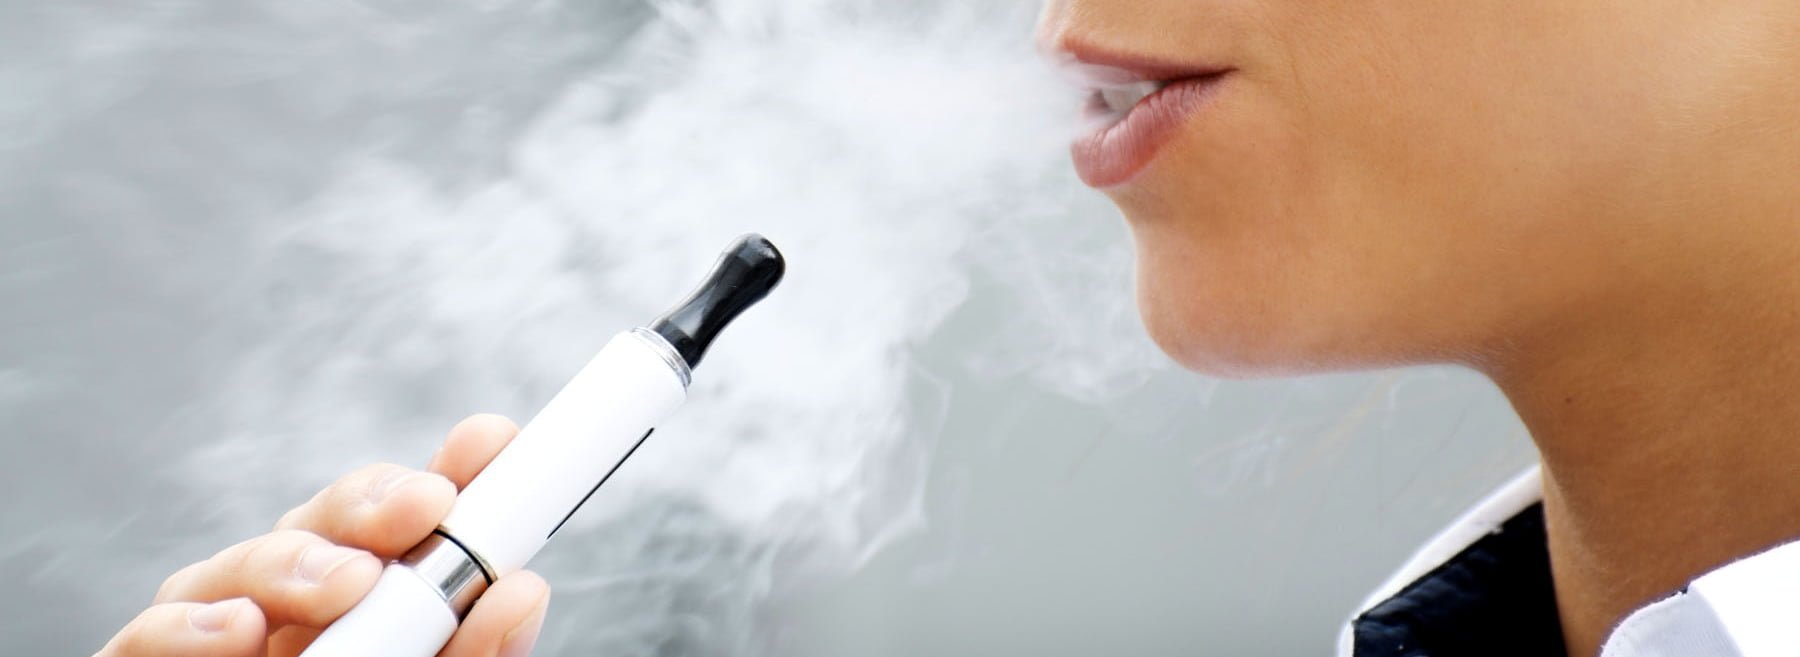 E Cigarettes More Or Less Effective Than Nicotine Patches In Study E1419775307527 مجلة نقطة العلمية